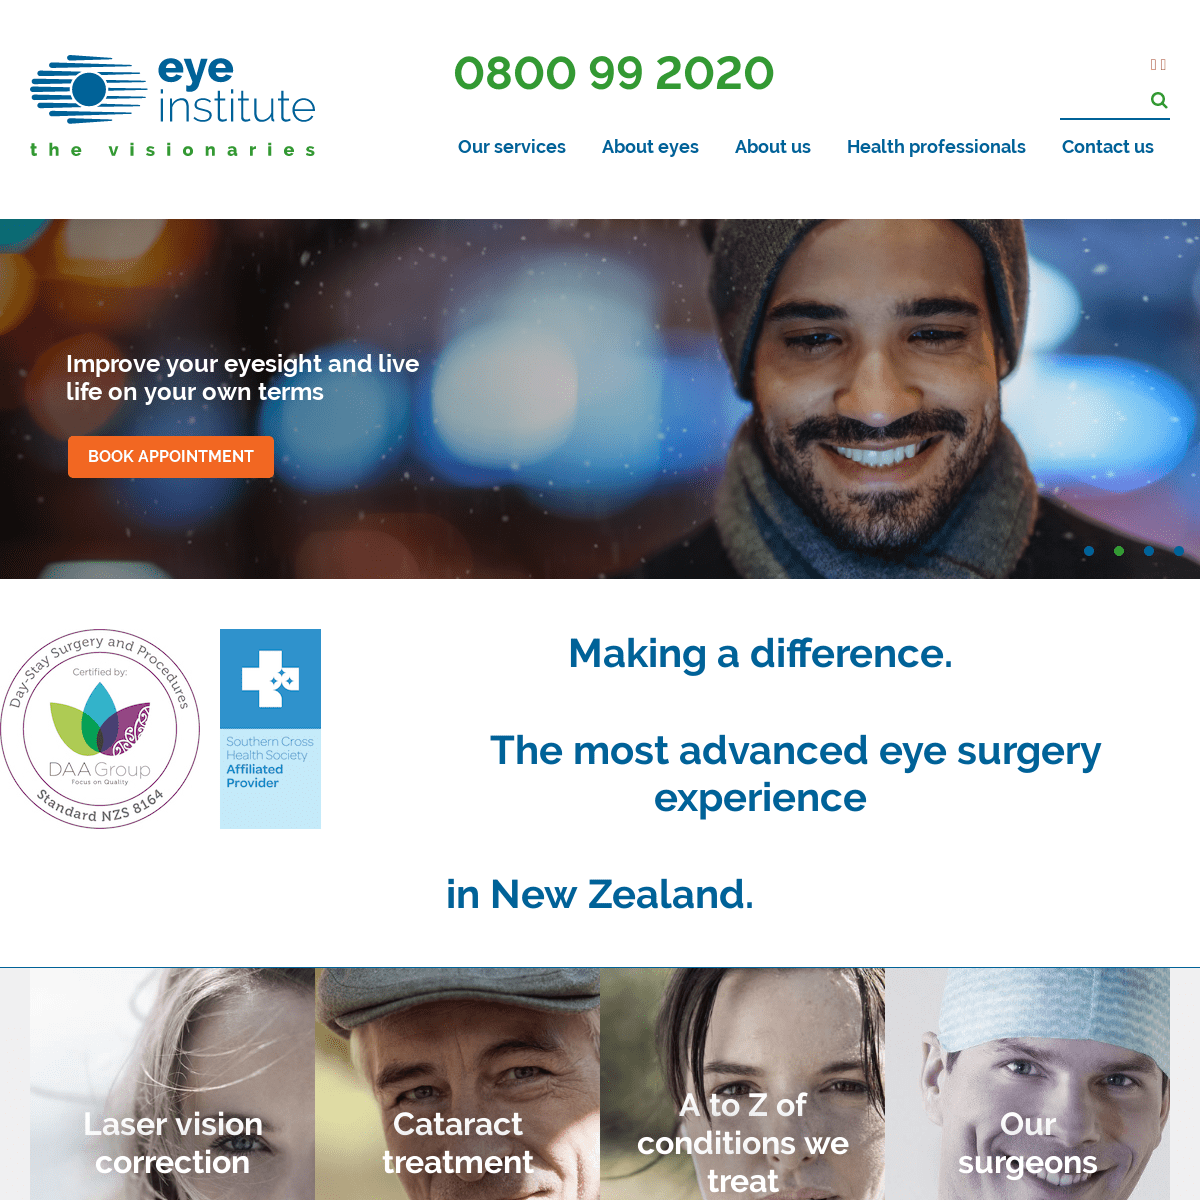 A complete backup of eyeinstitute.co.nz